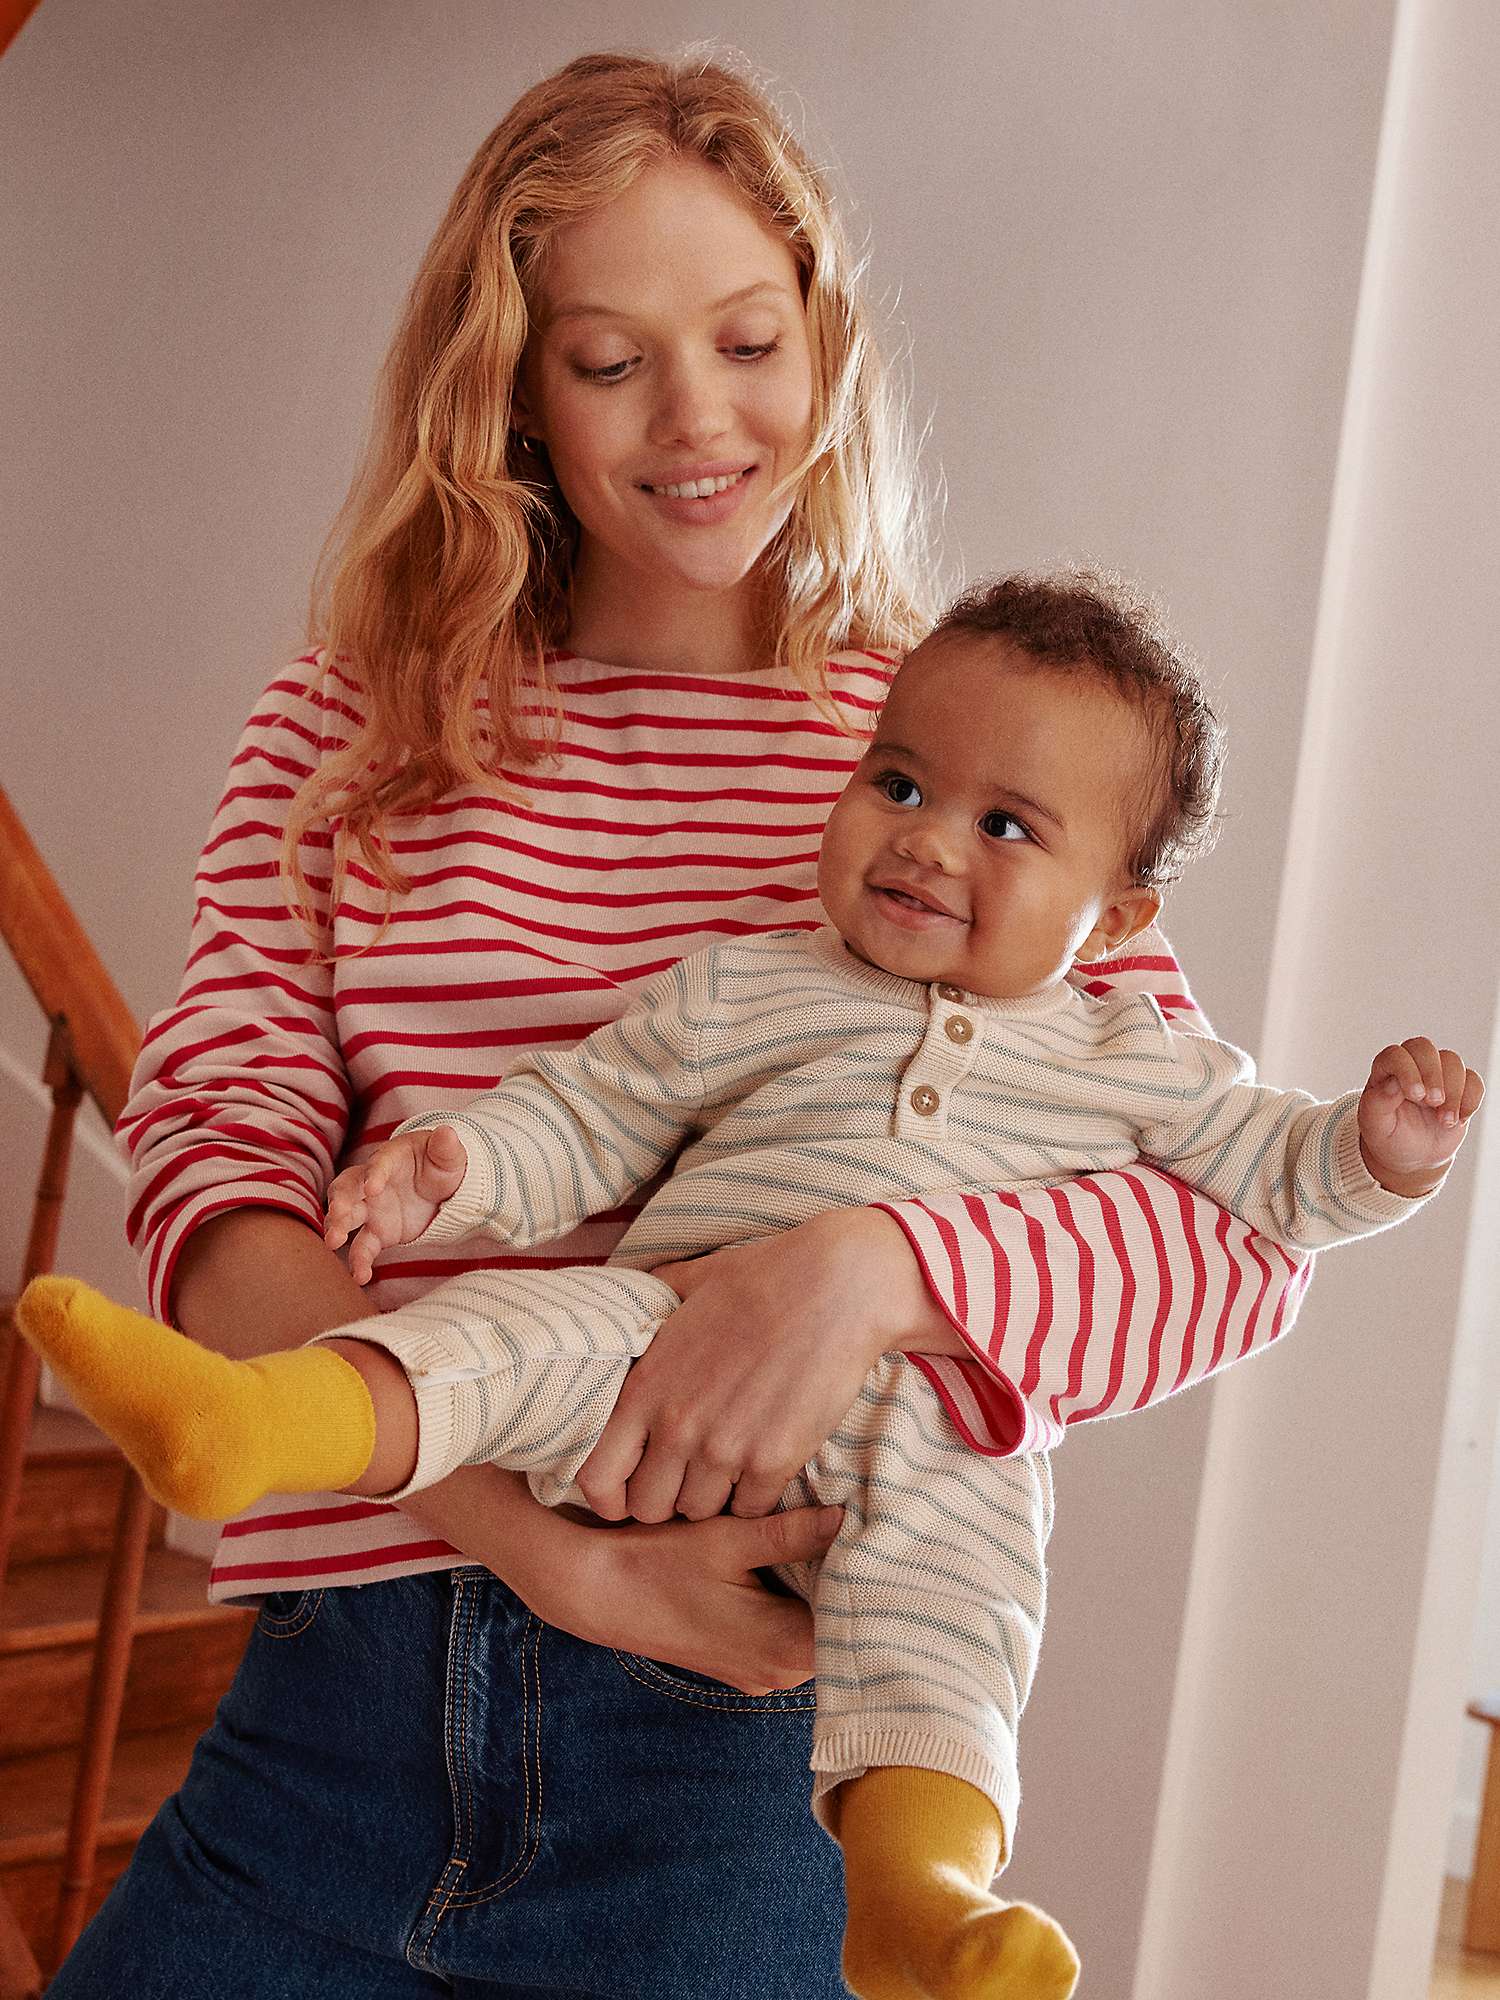 Buy Petit Bateau Baby Knitted Stripe Romper, Avalanche/Herbier Online at johnlewis.com